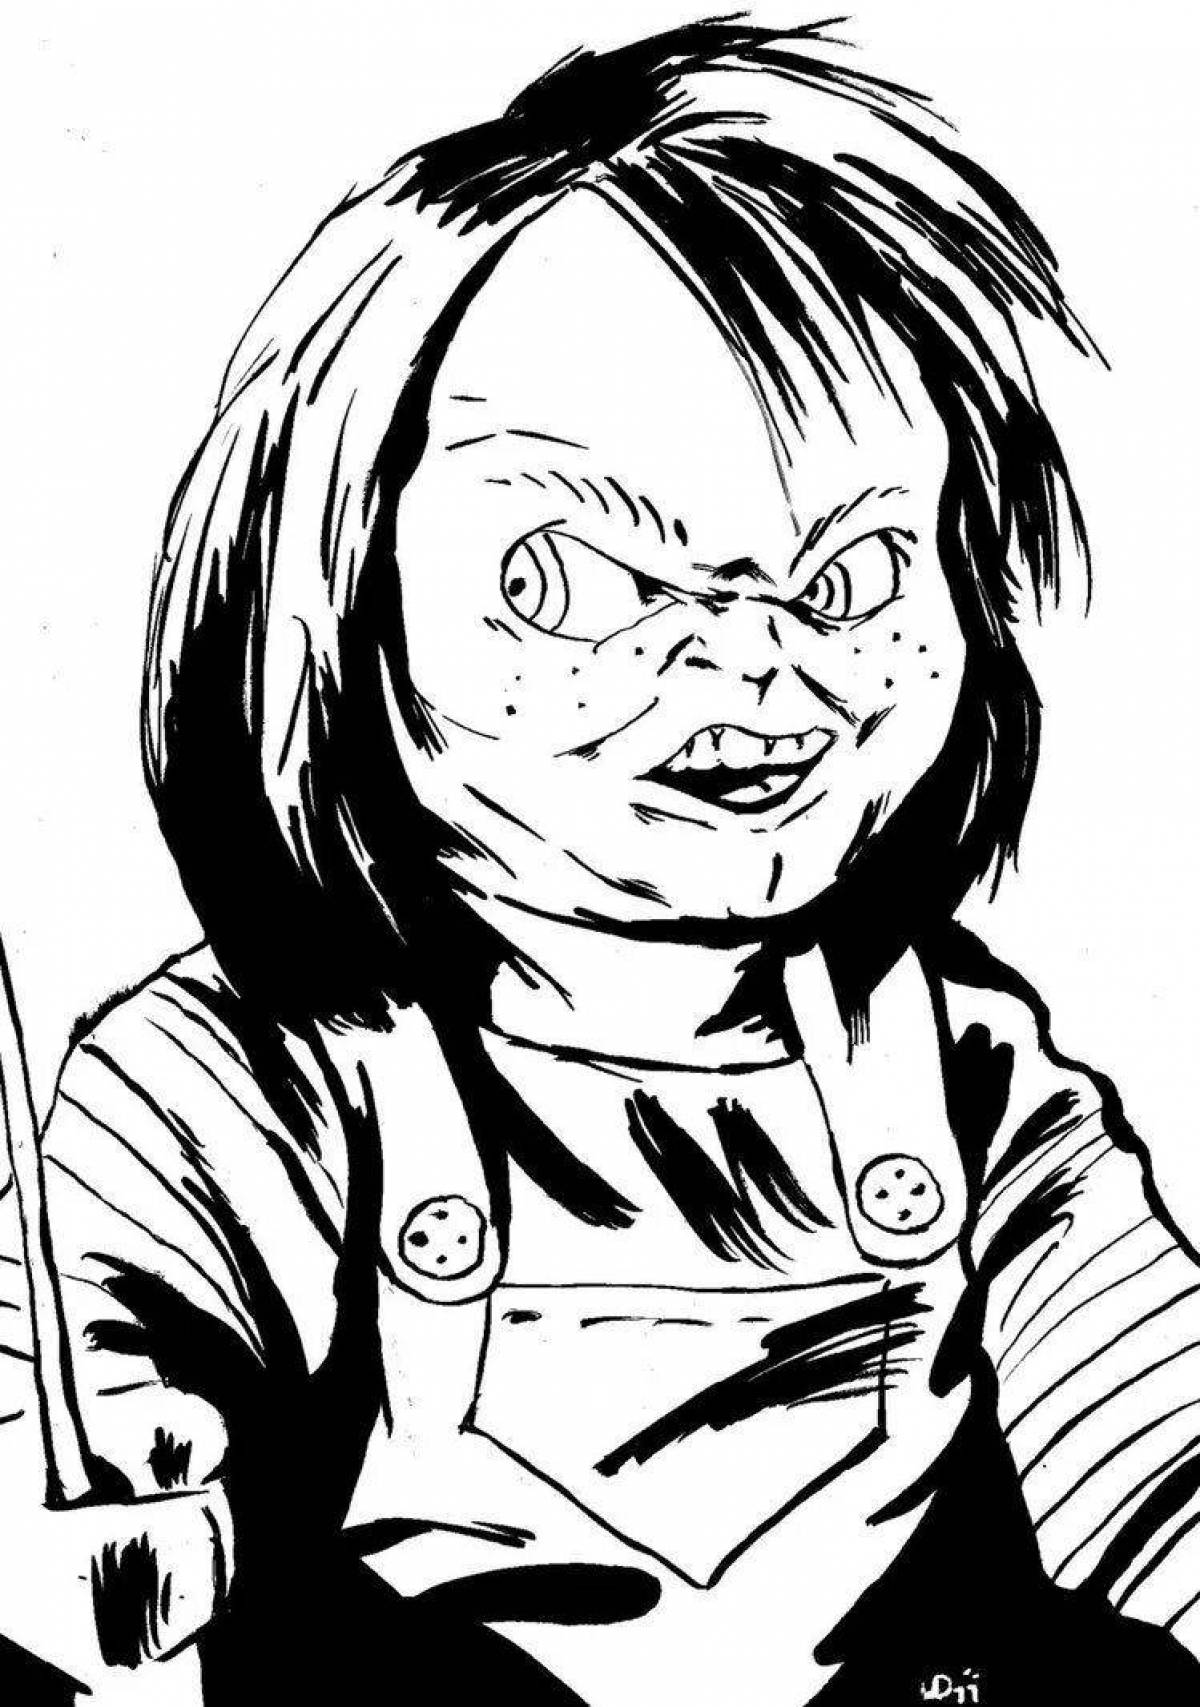 Coloring chucky - disgusting